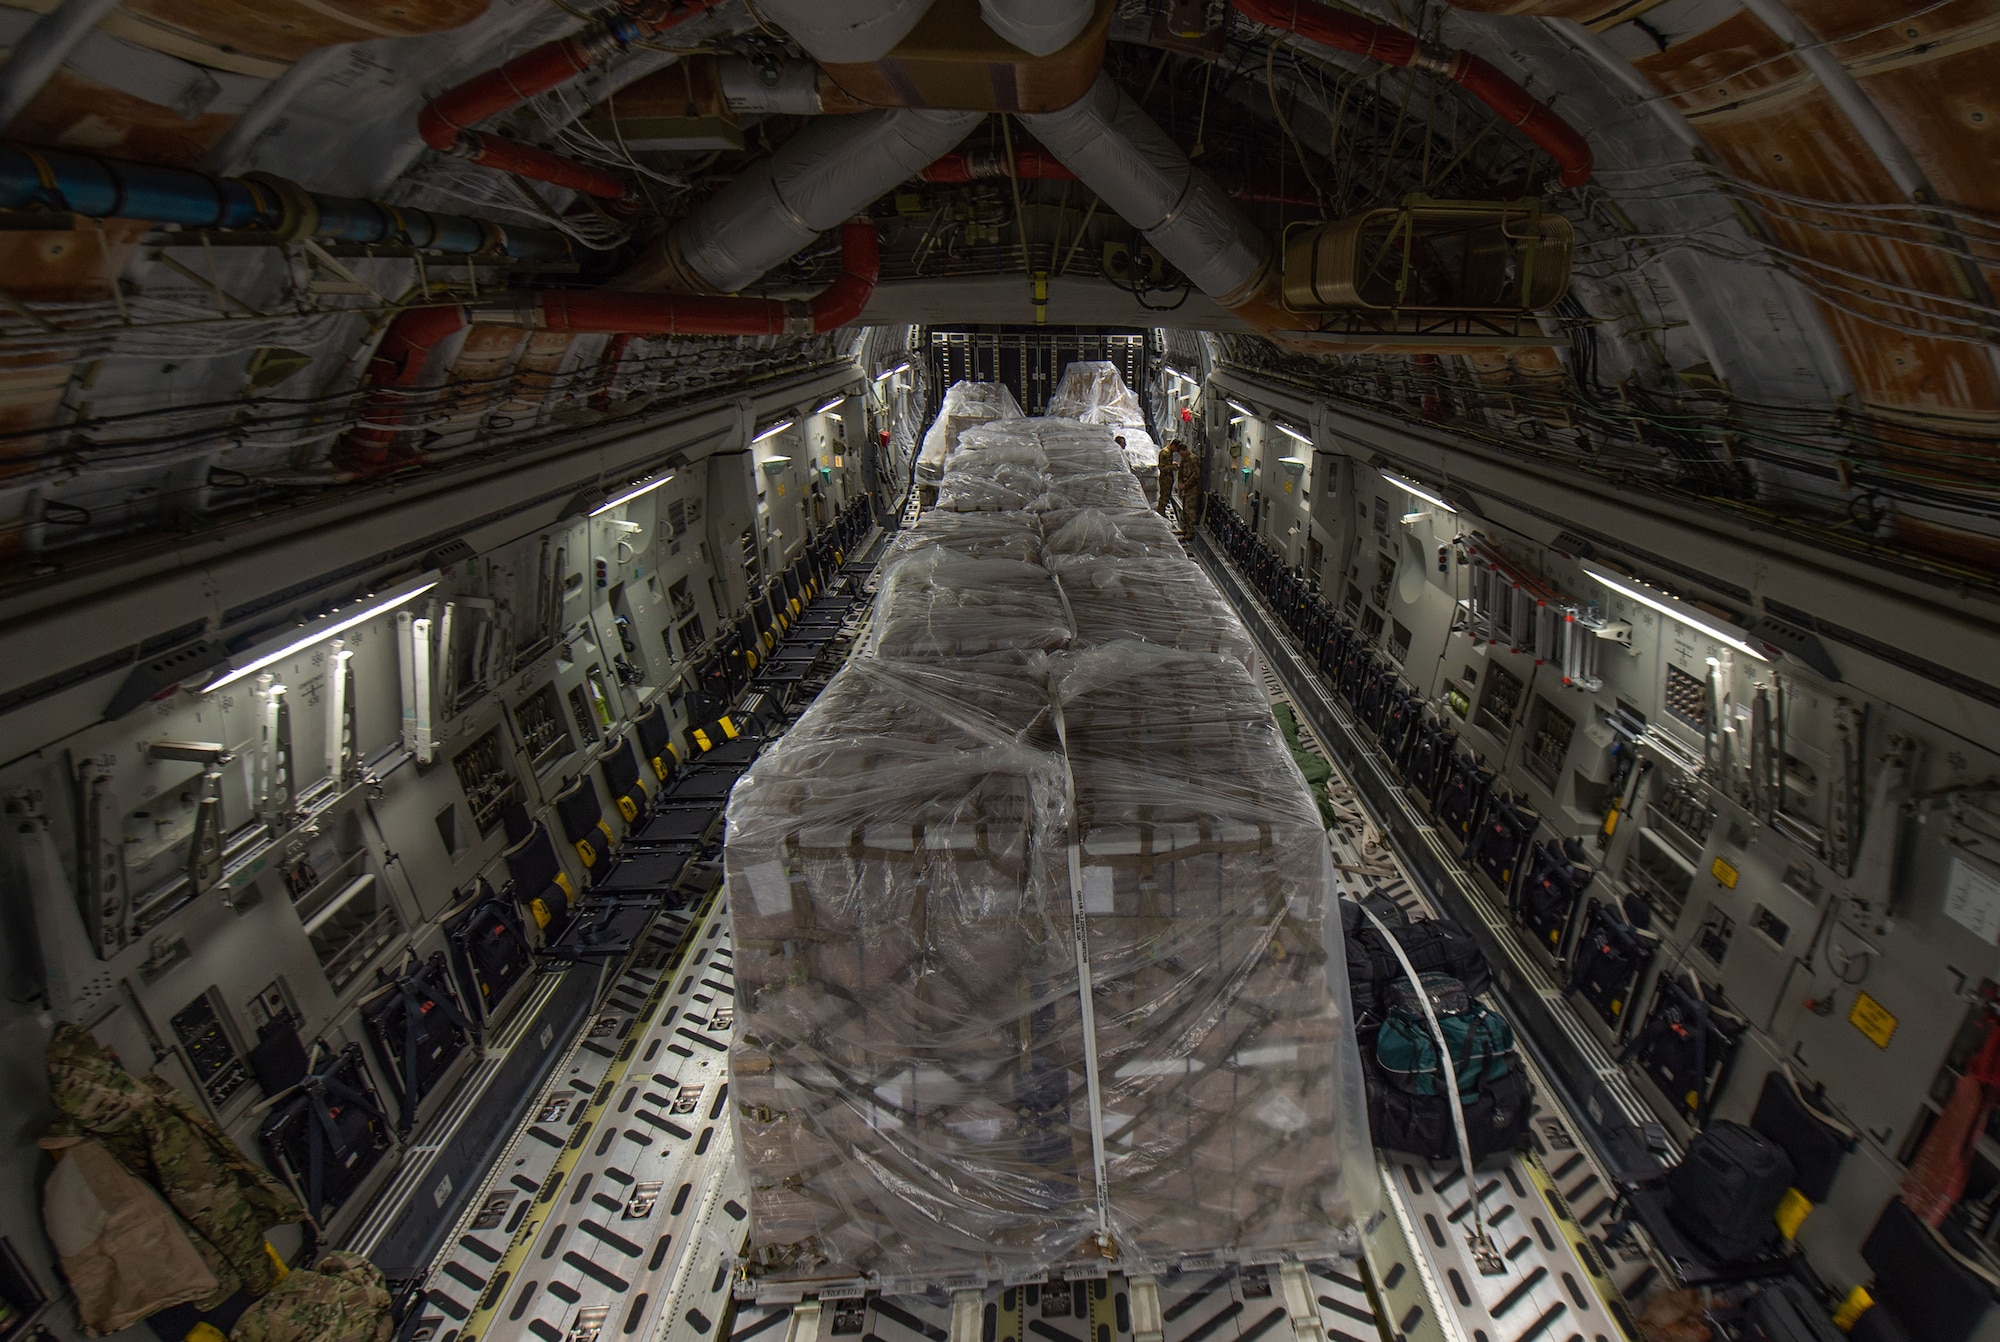 Pallets containing more than 83,000 pounds of rice sit inside a C-17 Globemaster III assigned to the 62nd Airlift Wing, Joint Base Lewis-McChord, Wash., at Altus Air Force Base, Okla., Oct. 24, 2019. The rice was delivered to Honduras during a humanitarian mission to provide food for orphanages, schools and feeding programs for children and families. (U.S Air Force photo by Senior Airman Tryphena Mayhugh)